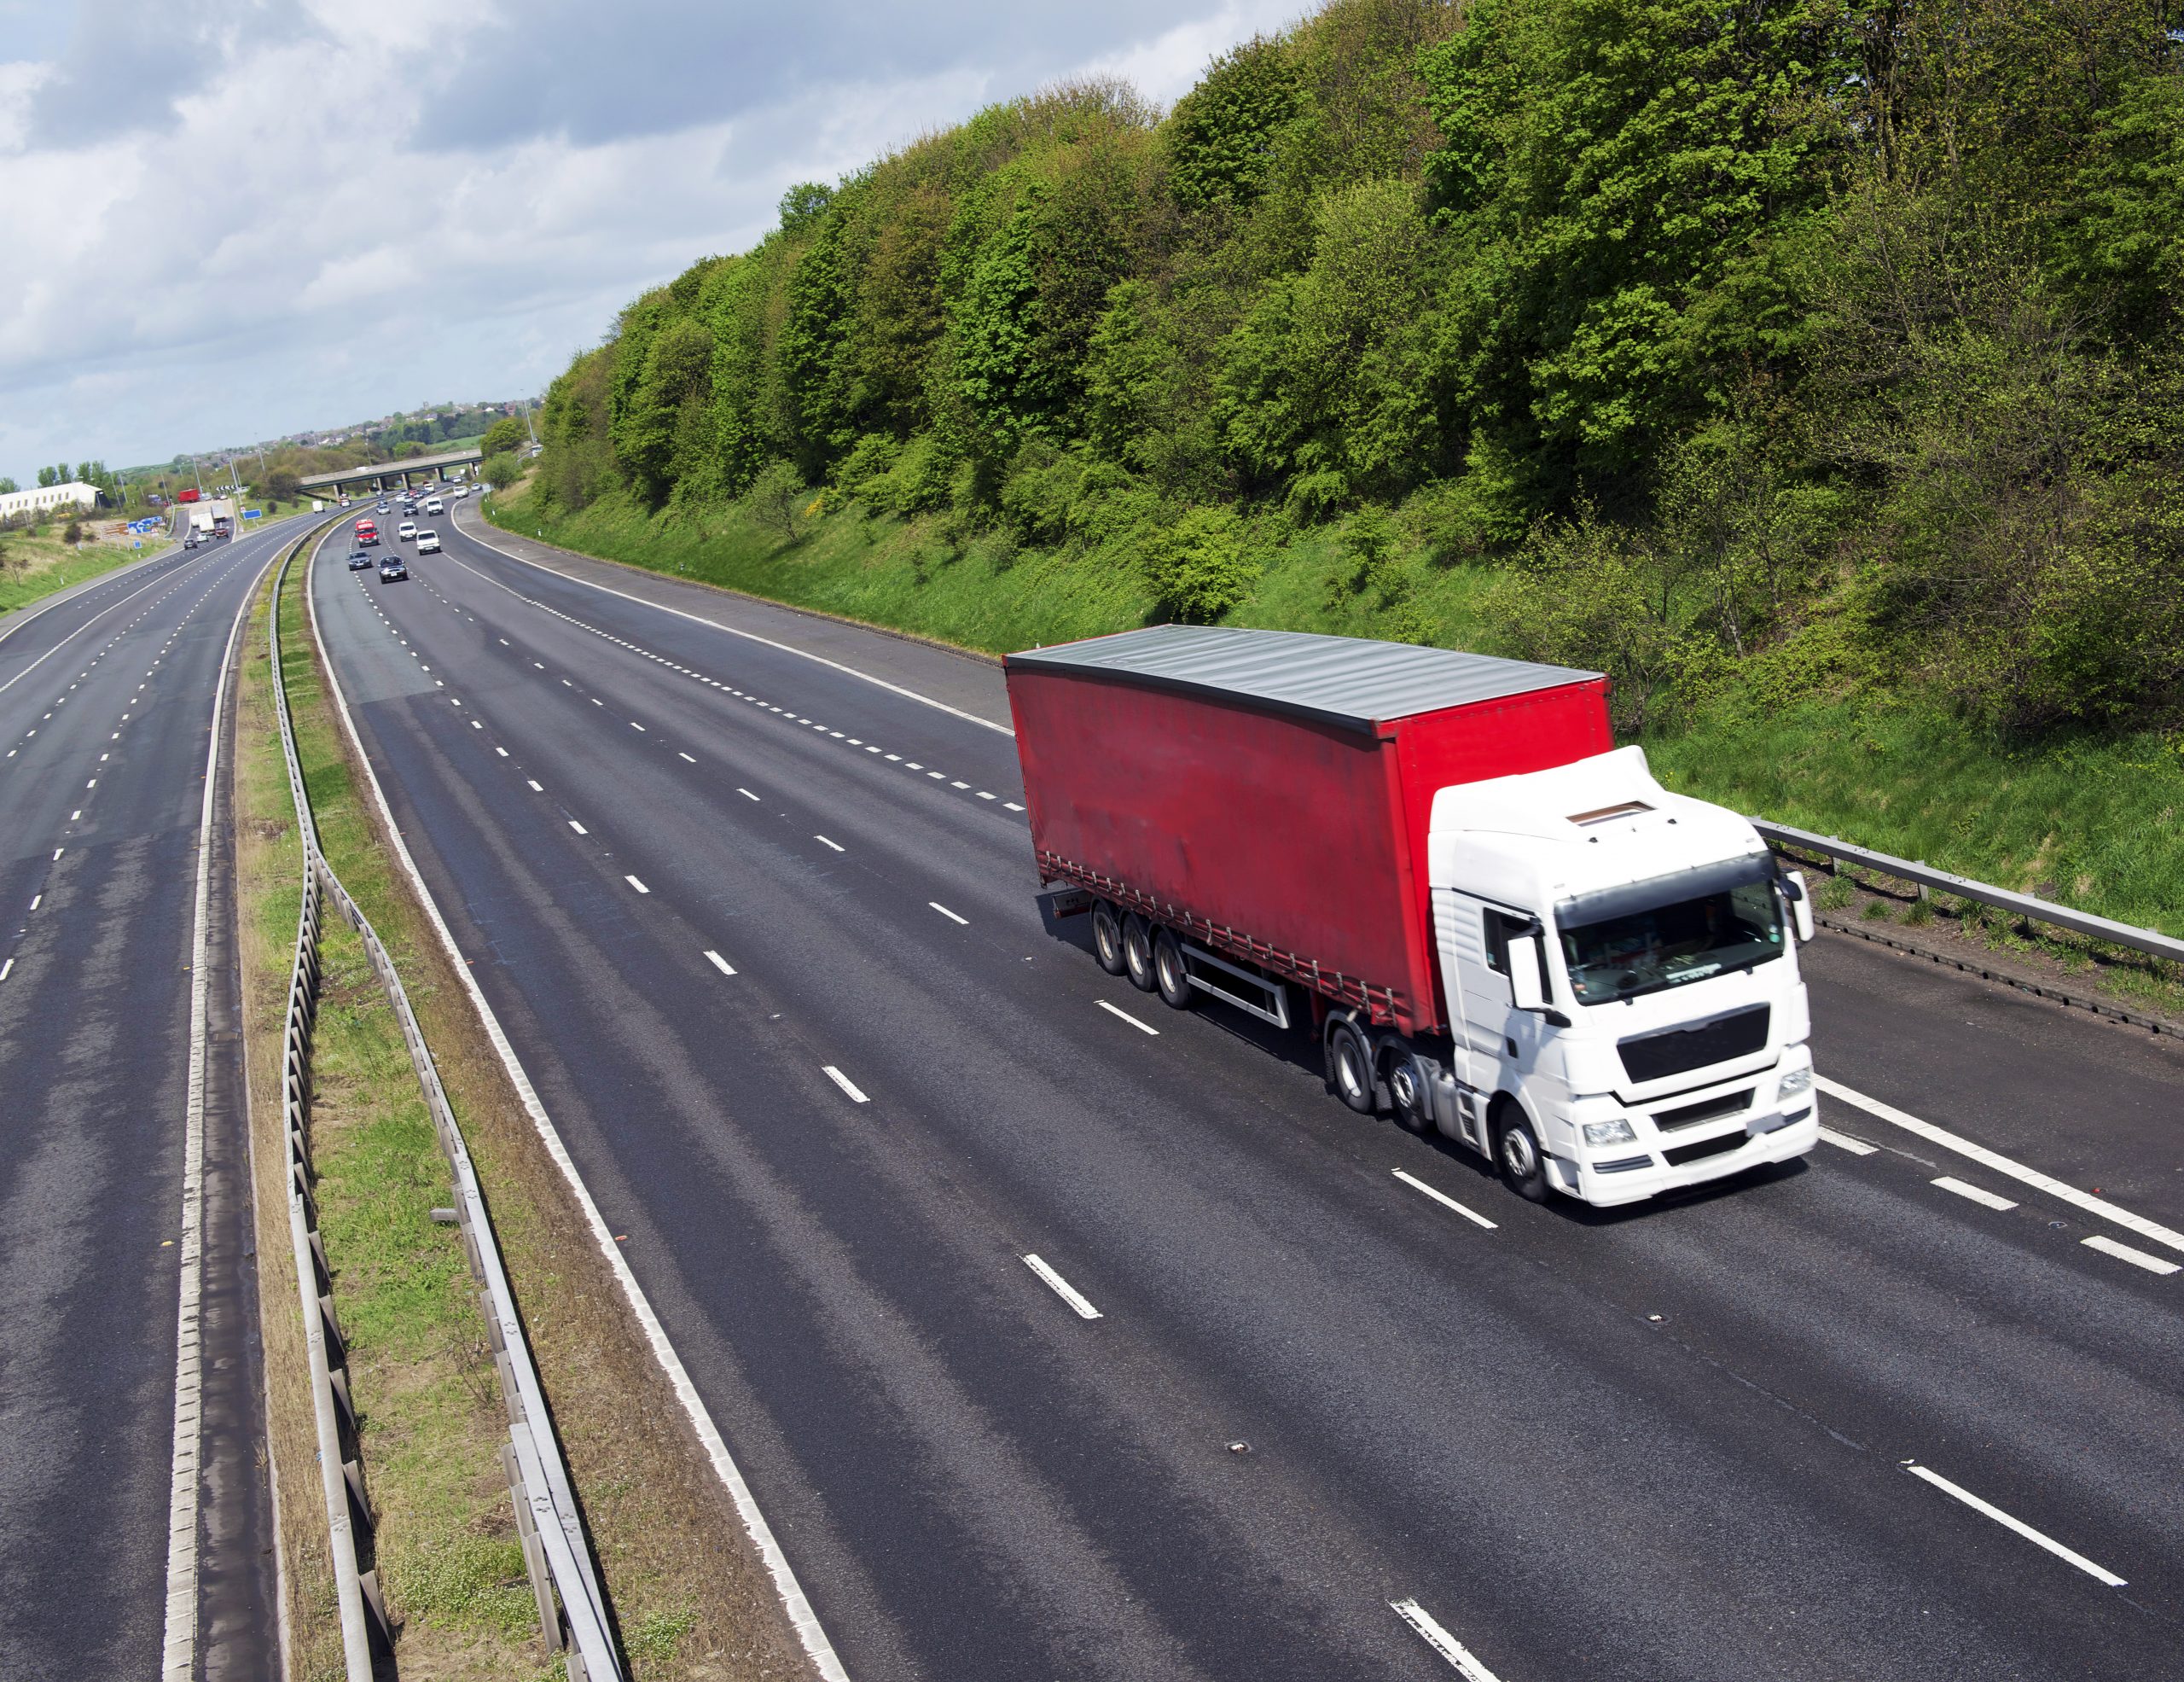 People trained to become HGV drivers